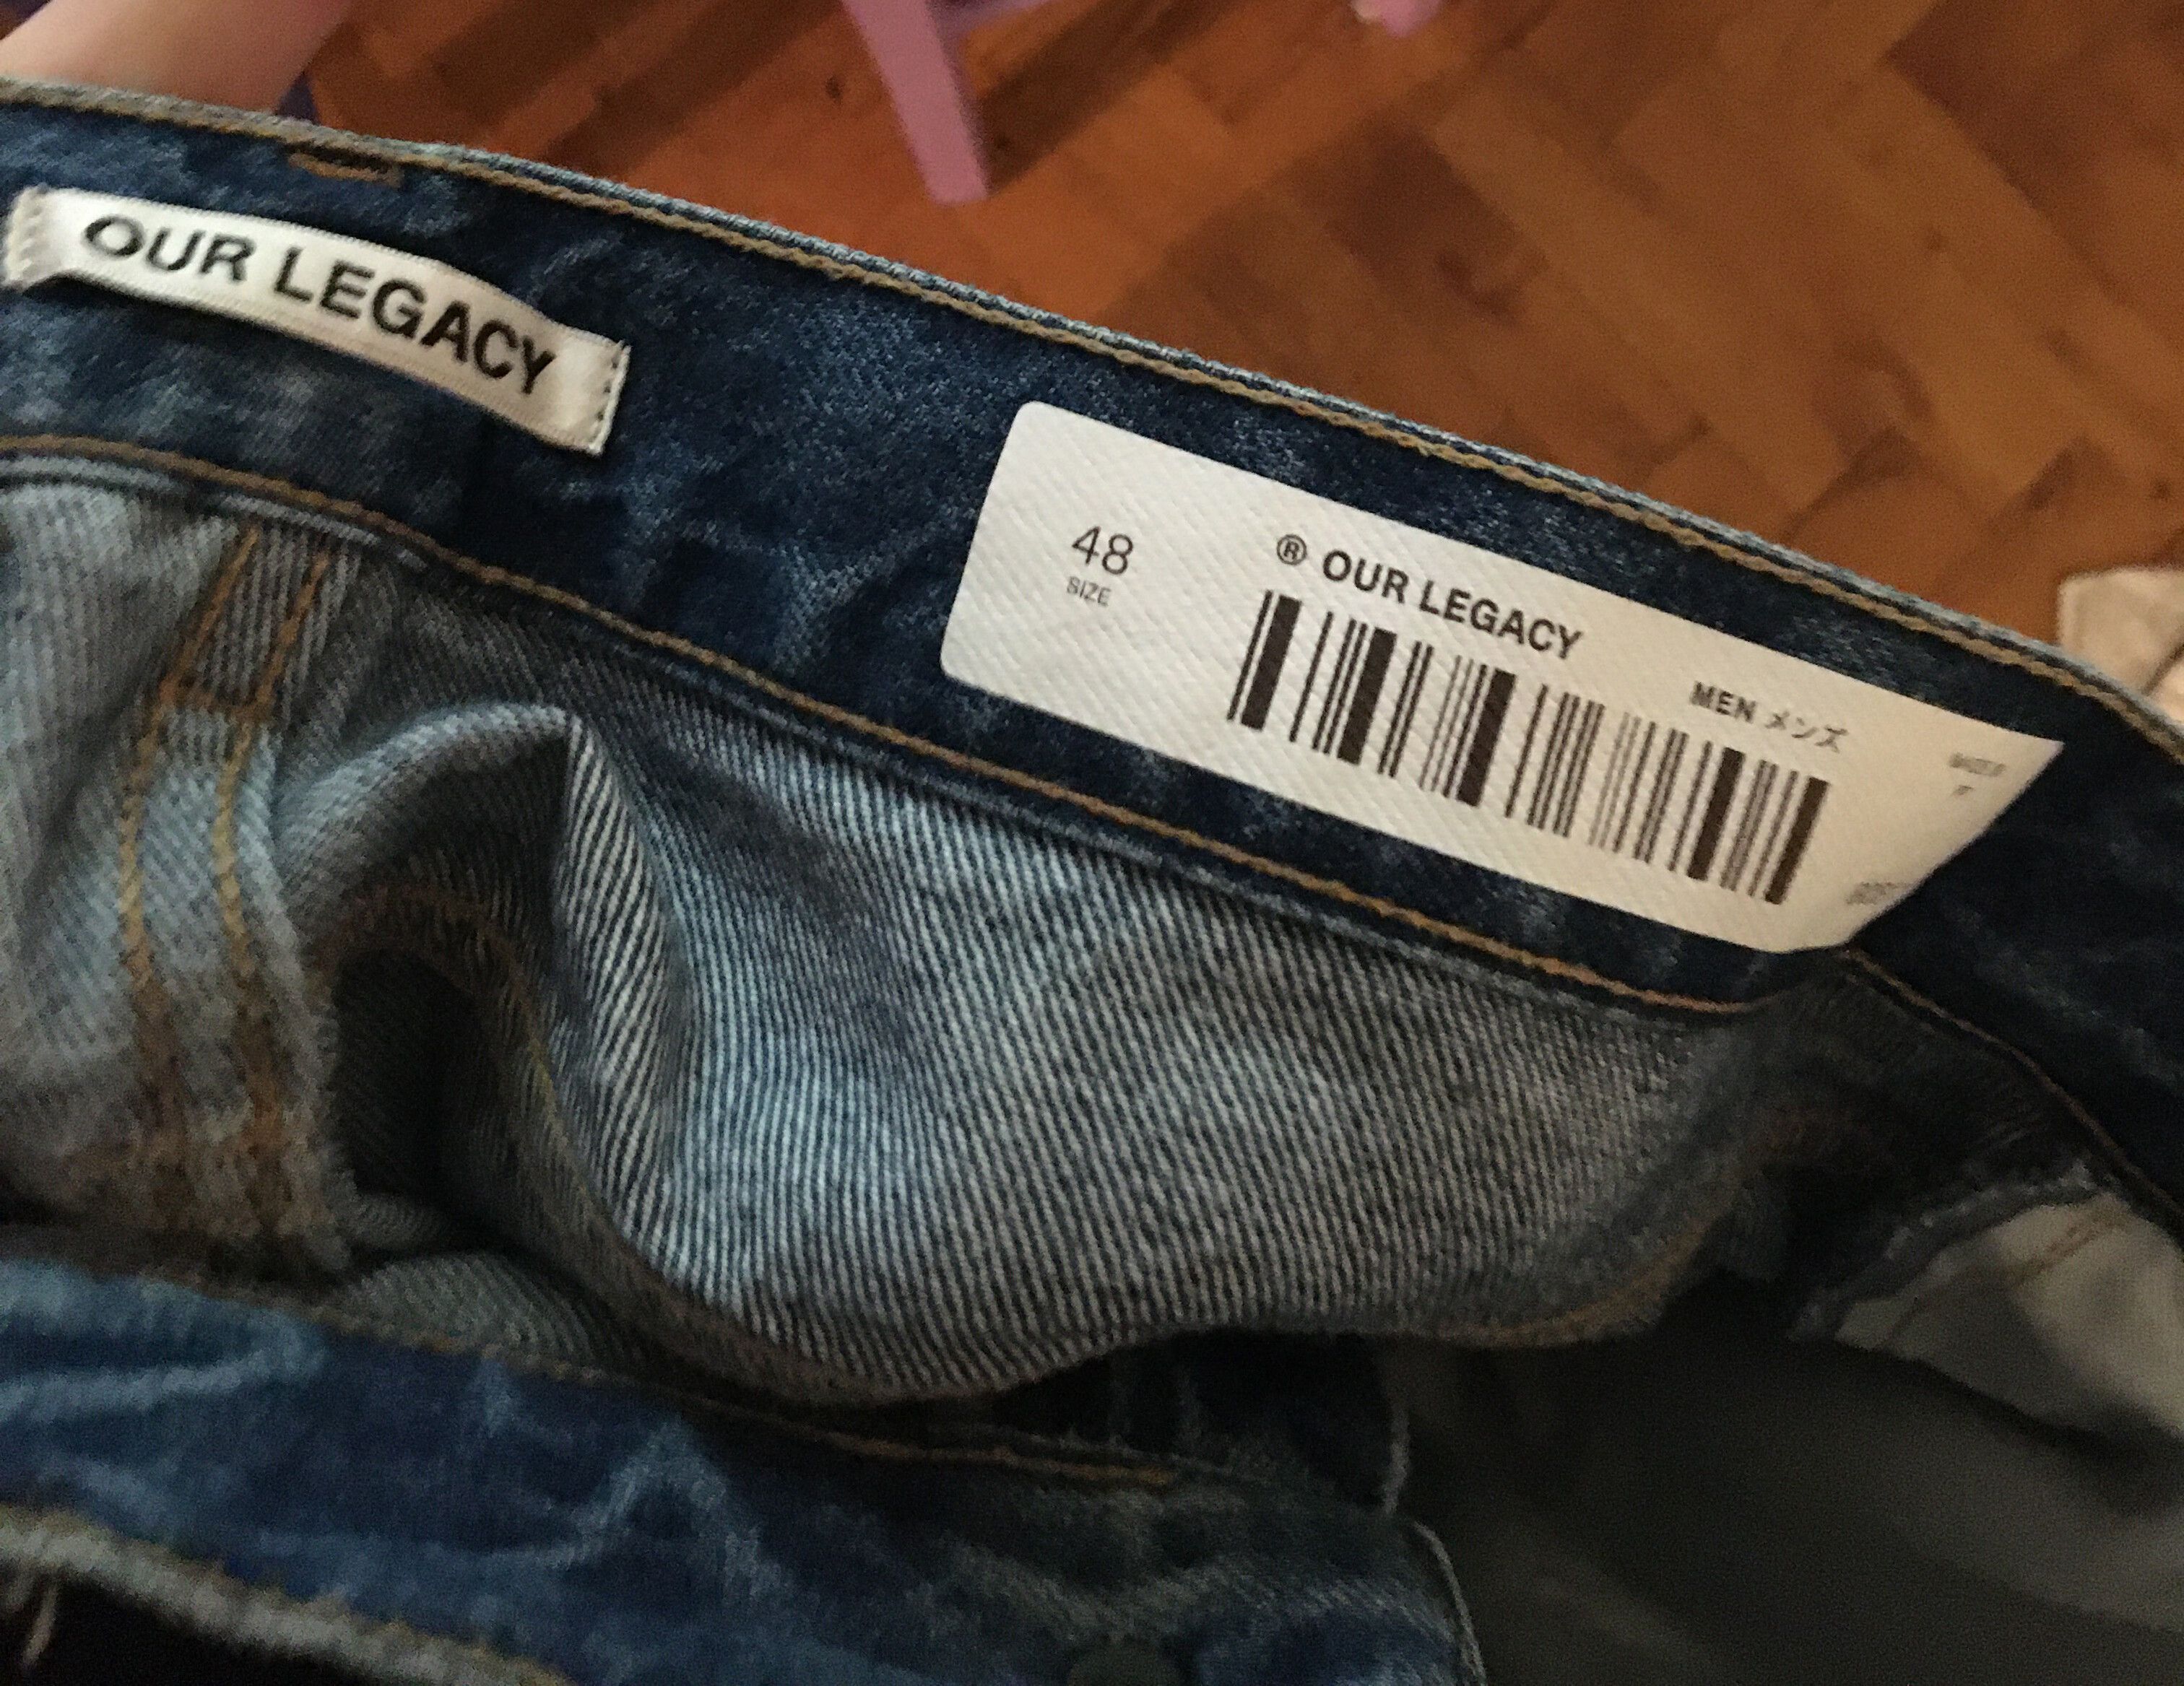 Our Legacy Our Legacy 3rd Cut Knee Coated Denim Size US 32 / EU 48 - 3 Preview